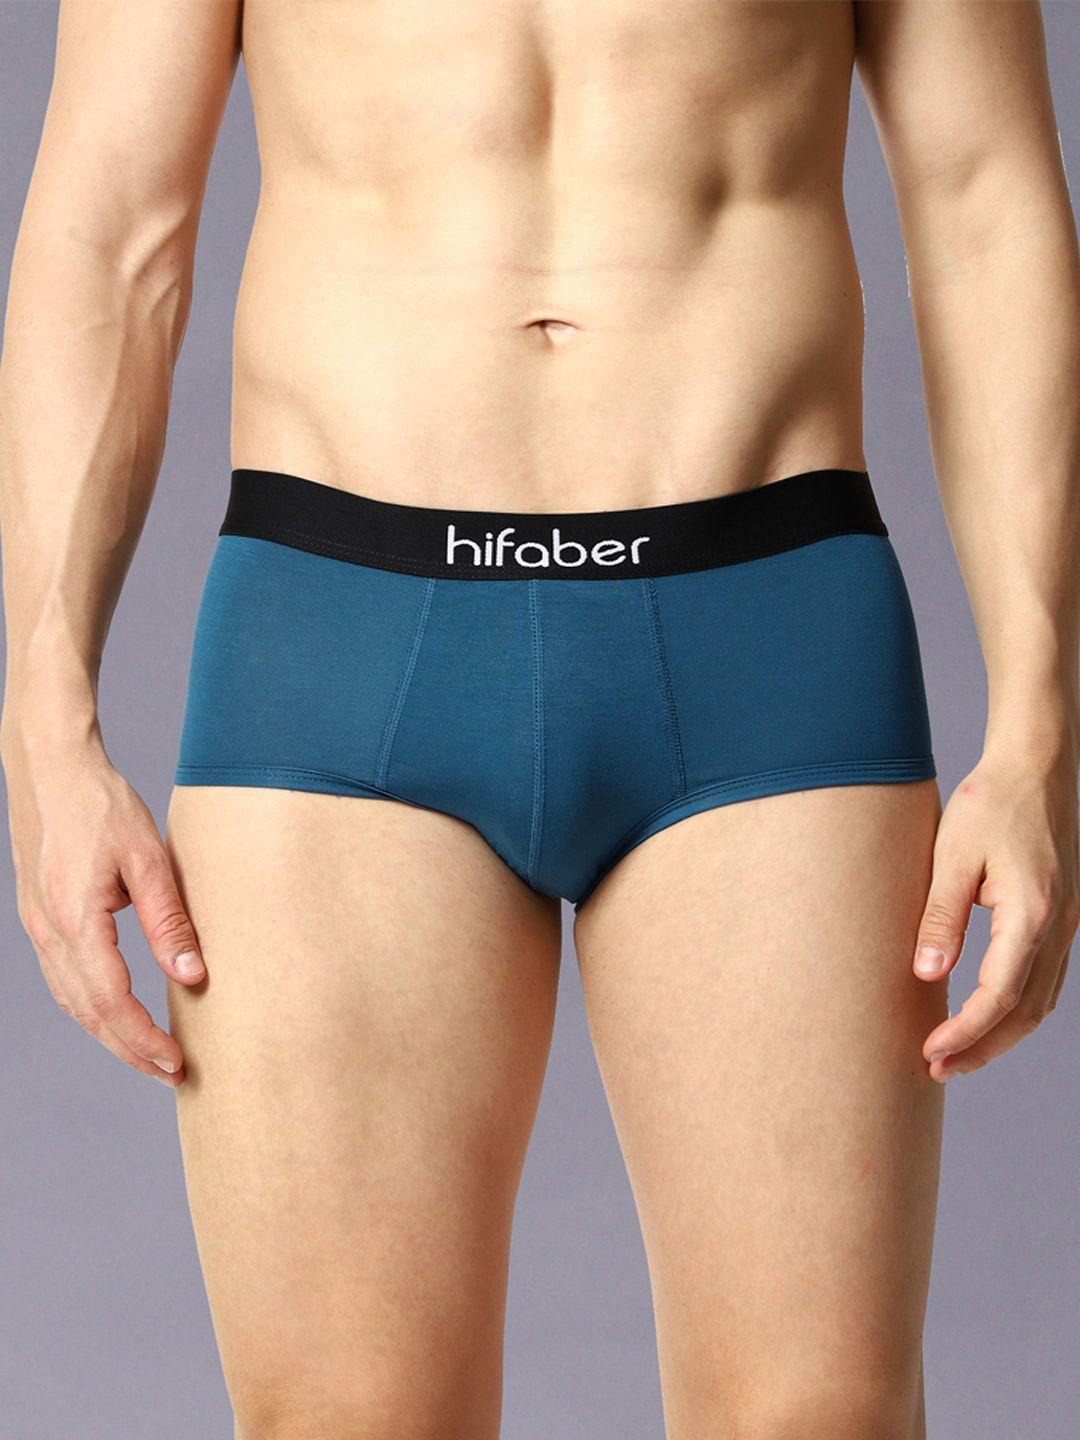 hifaber men anti-bacterial hipster briefs h0670_s